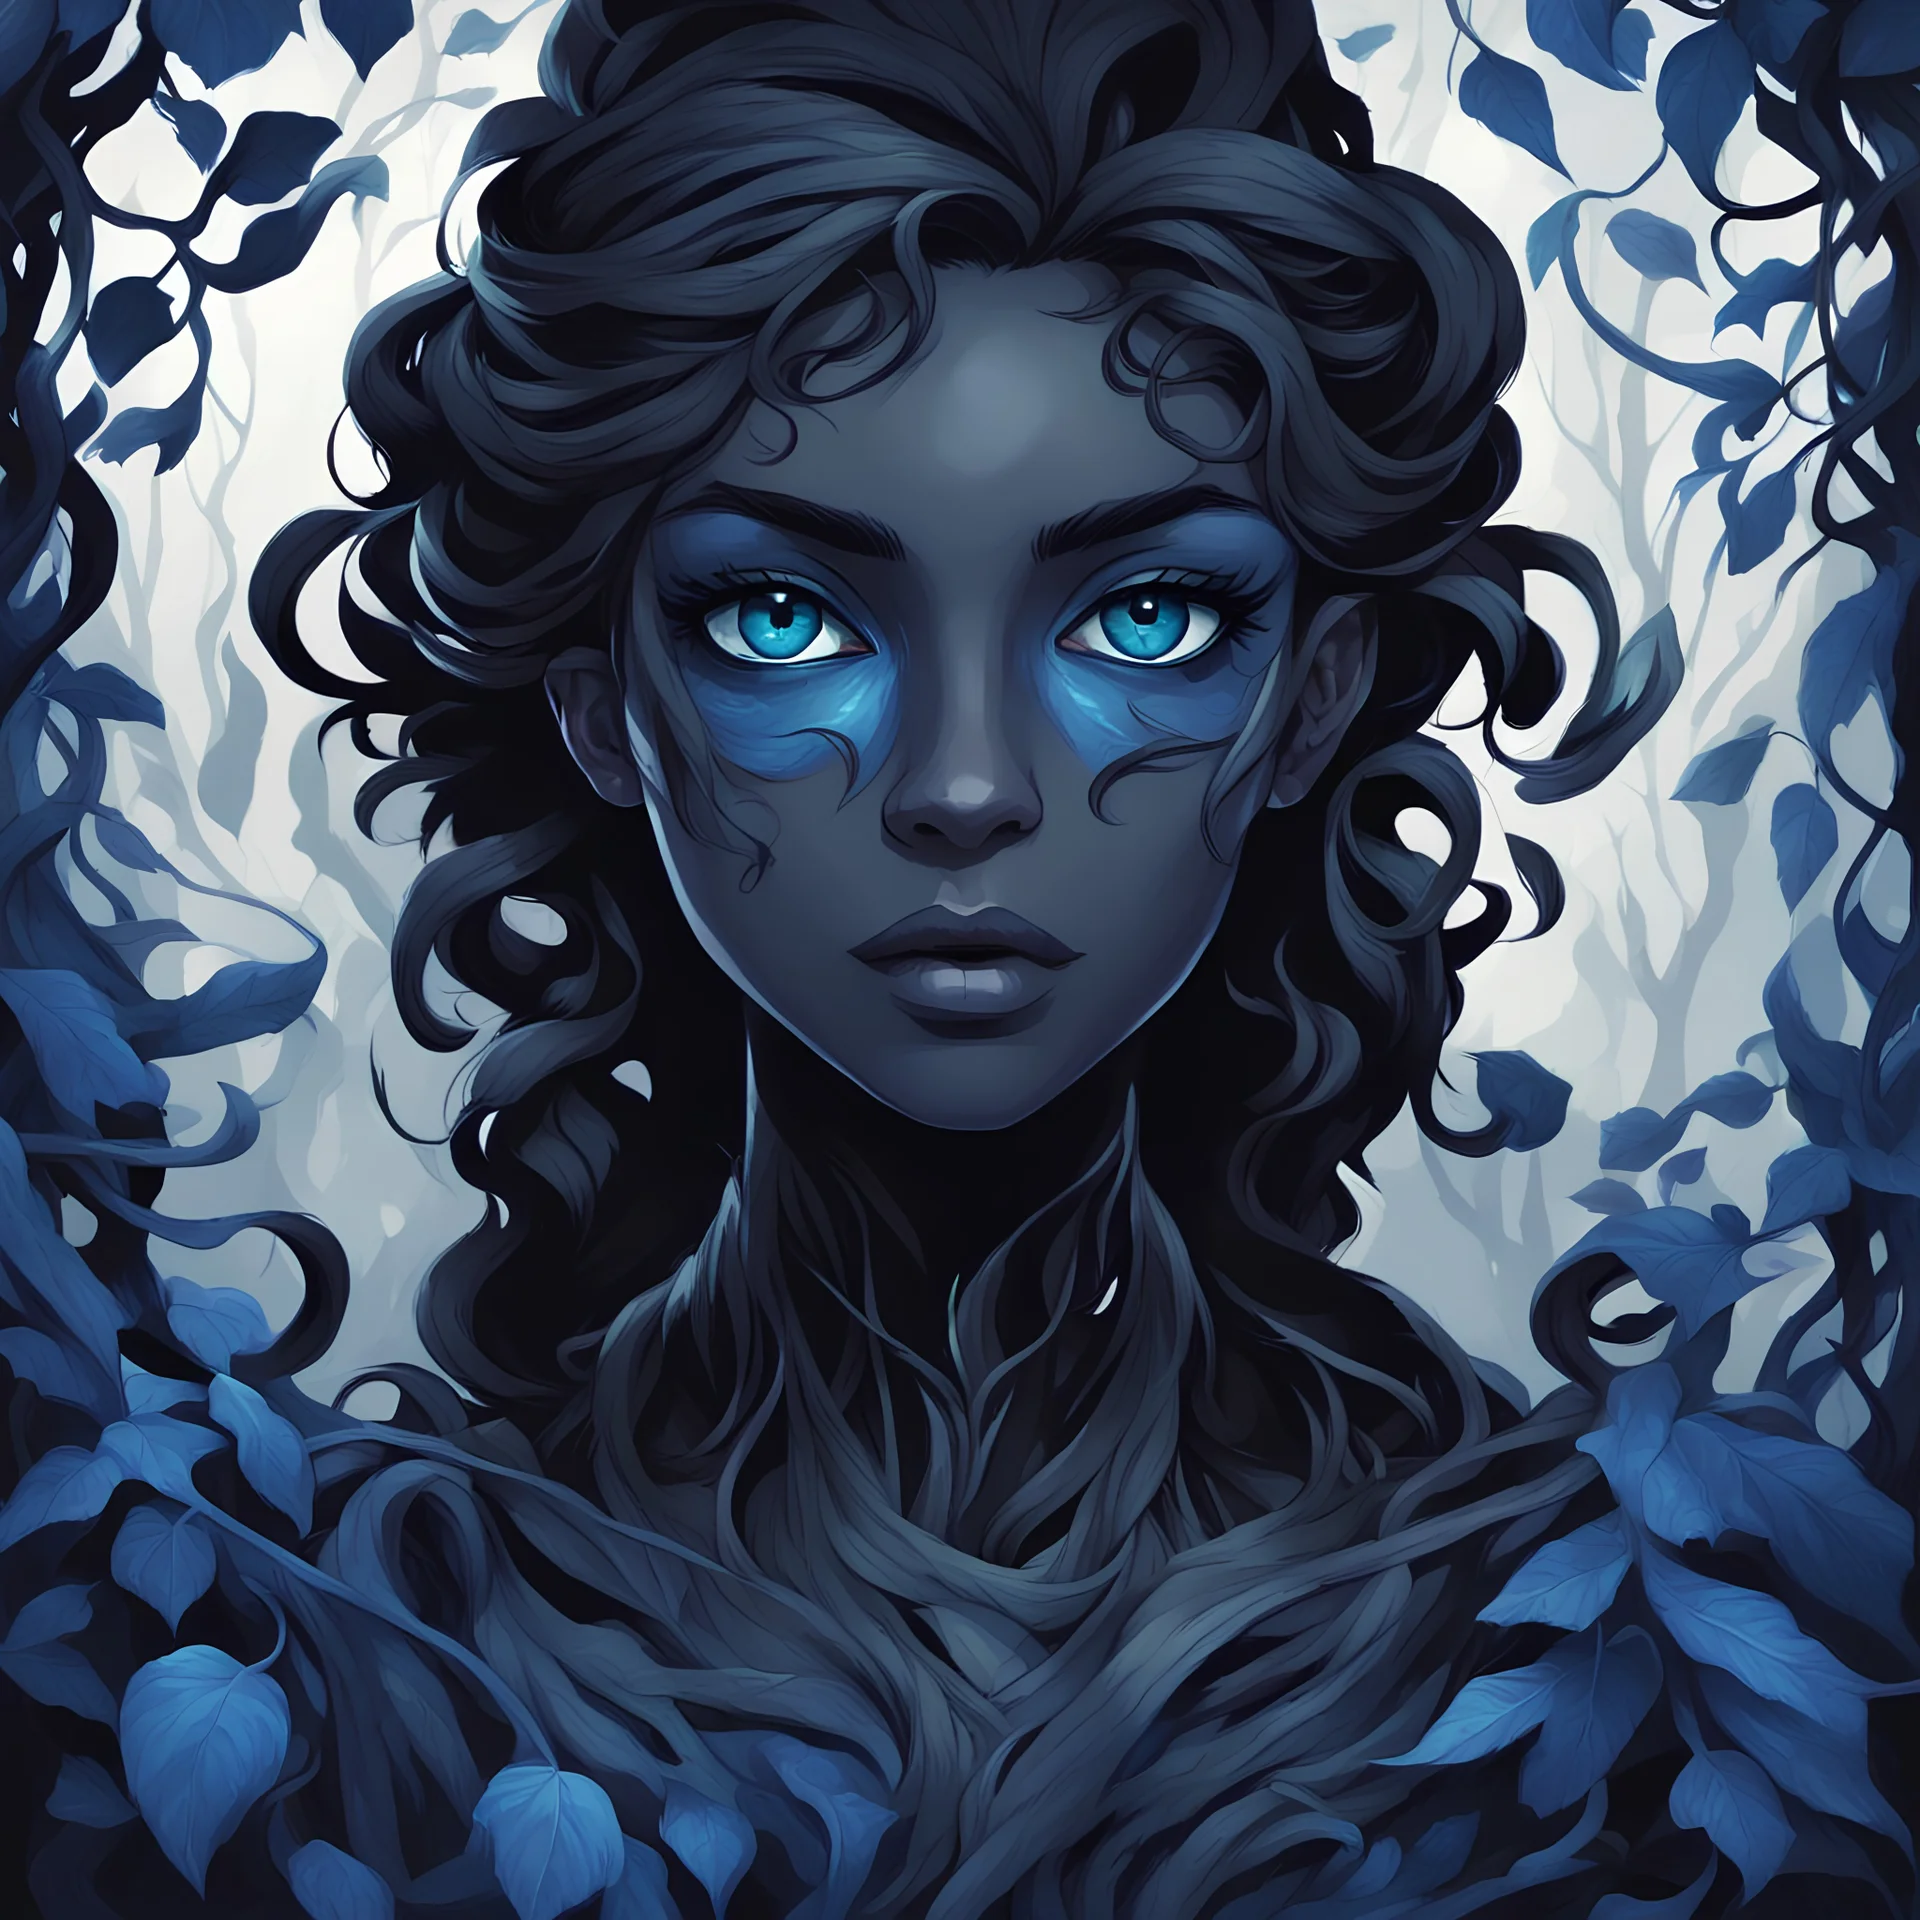 Ebony darkness with wide staring eyes wrapped in blue vines, in card art style